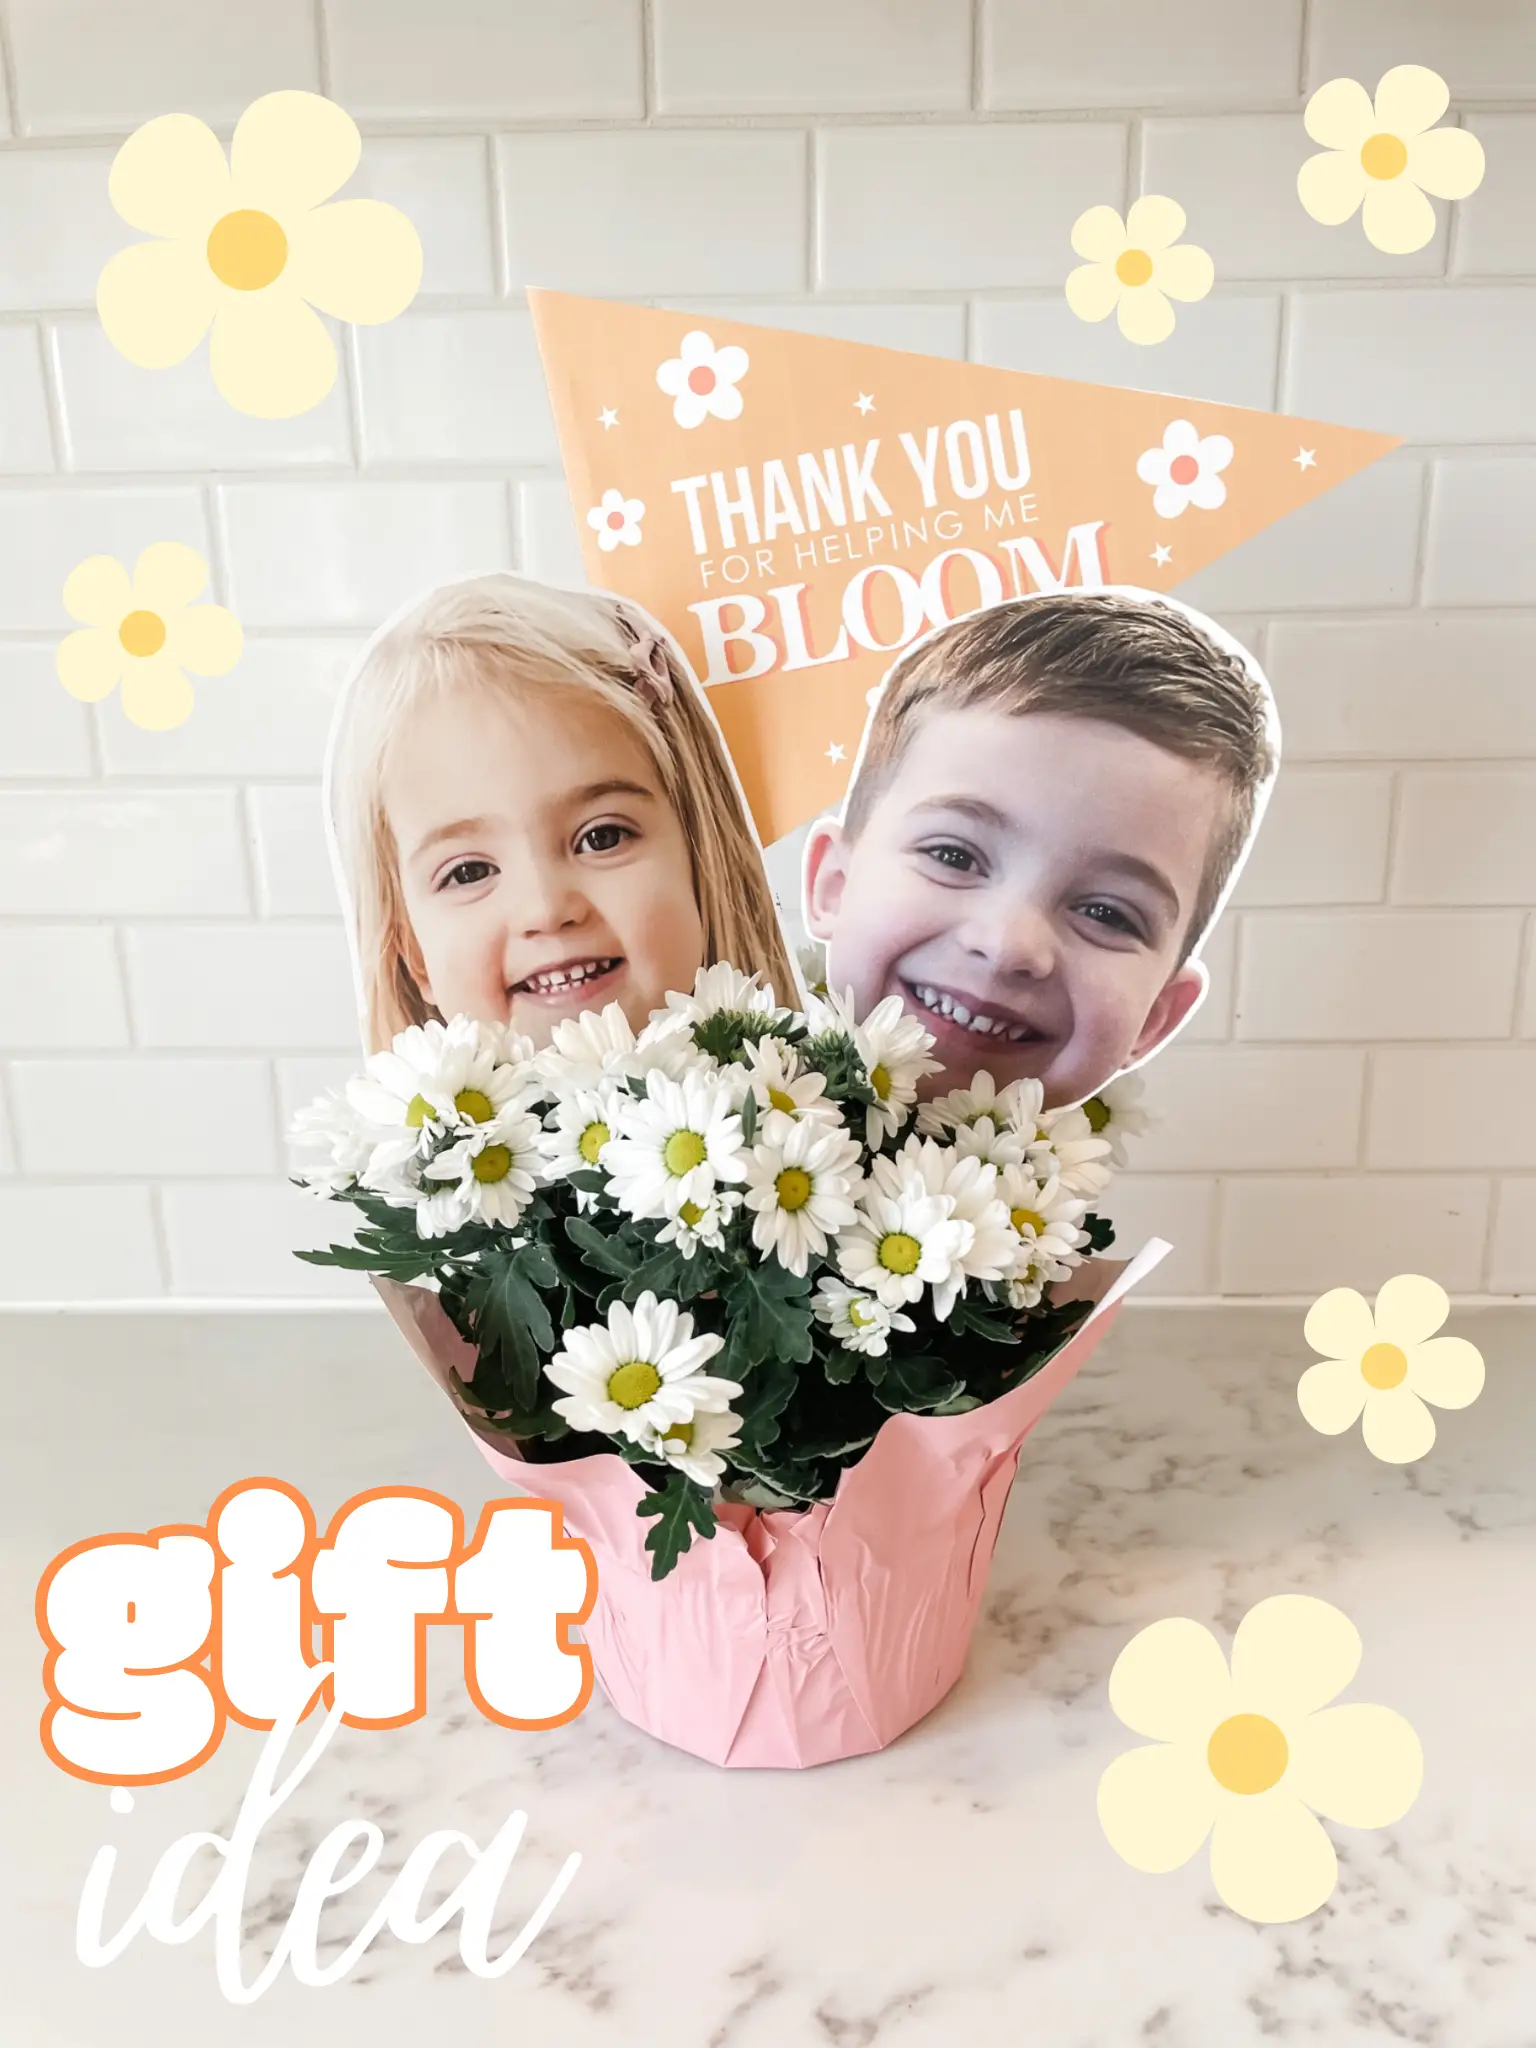 5 Inexpensive Valentine's Day Gift Ideas for Kids - Amy Lemons